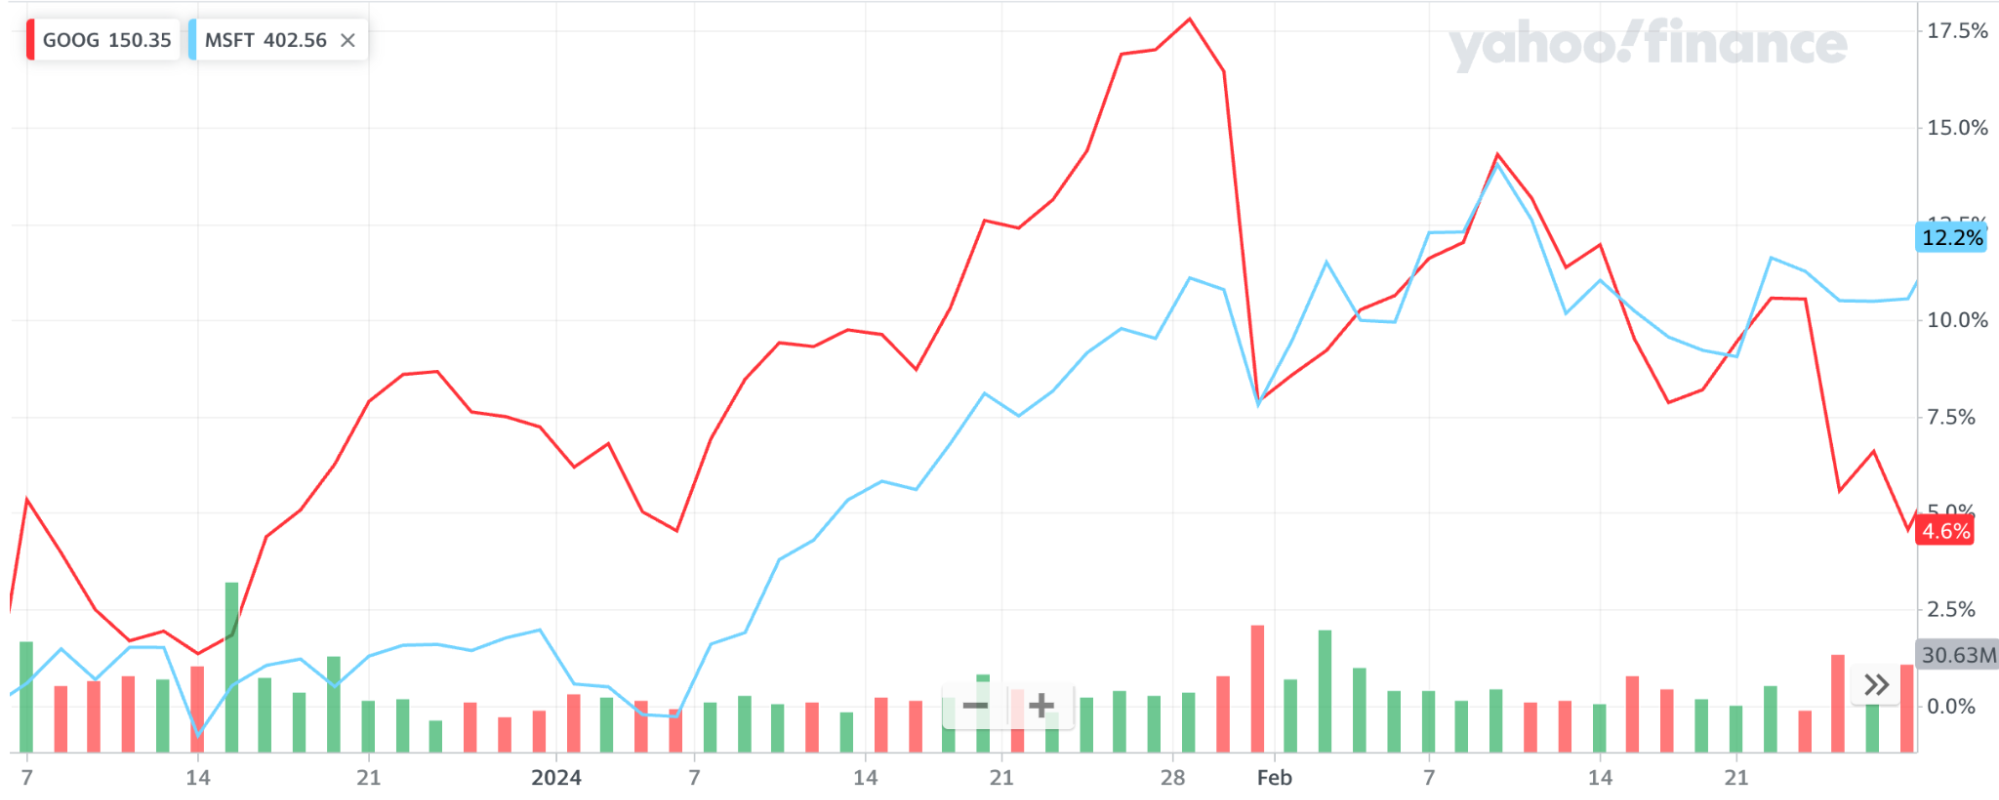 A graph showing Google's stock's rise and fall